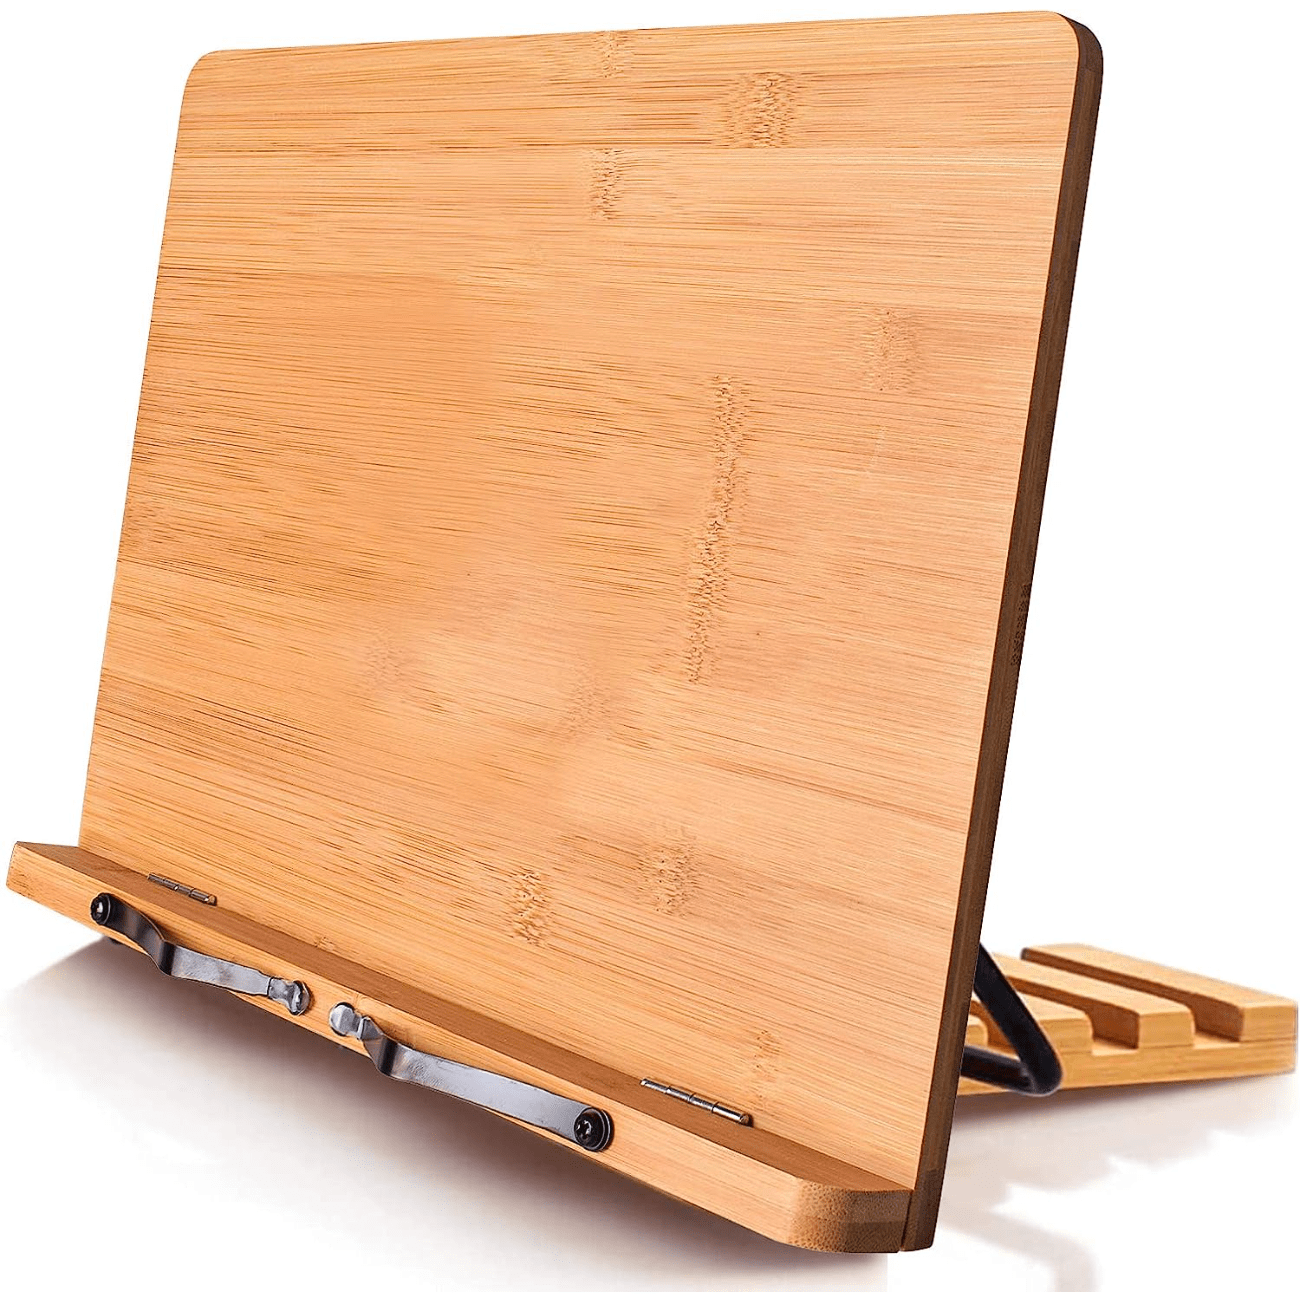 Bamboo Book Stand, Adjustable Book Holder Tray